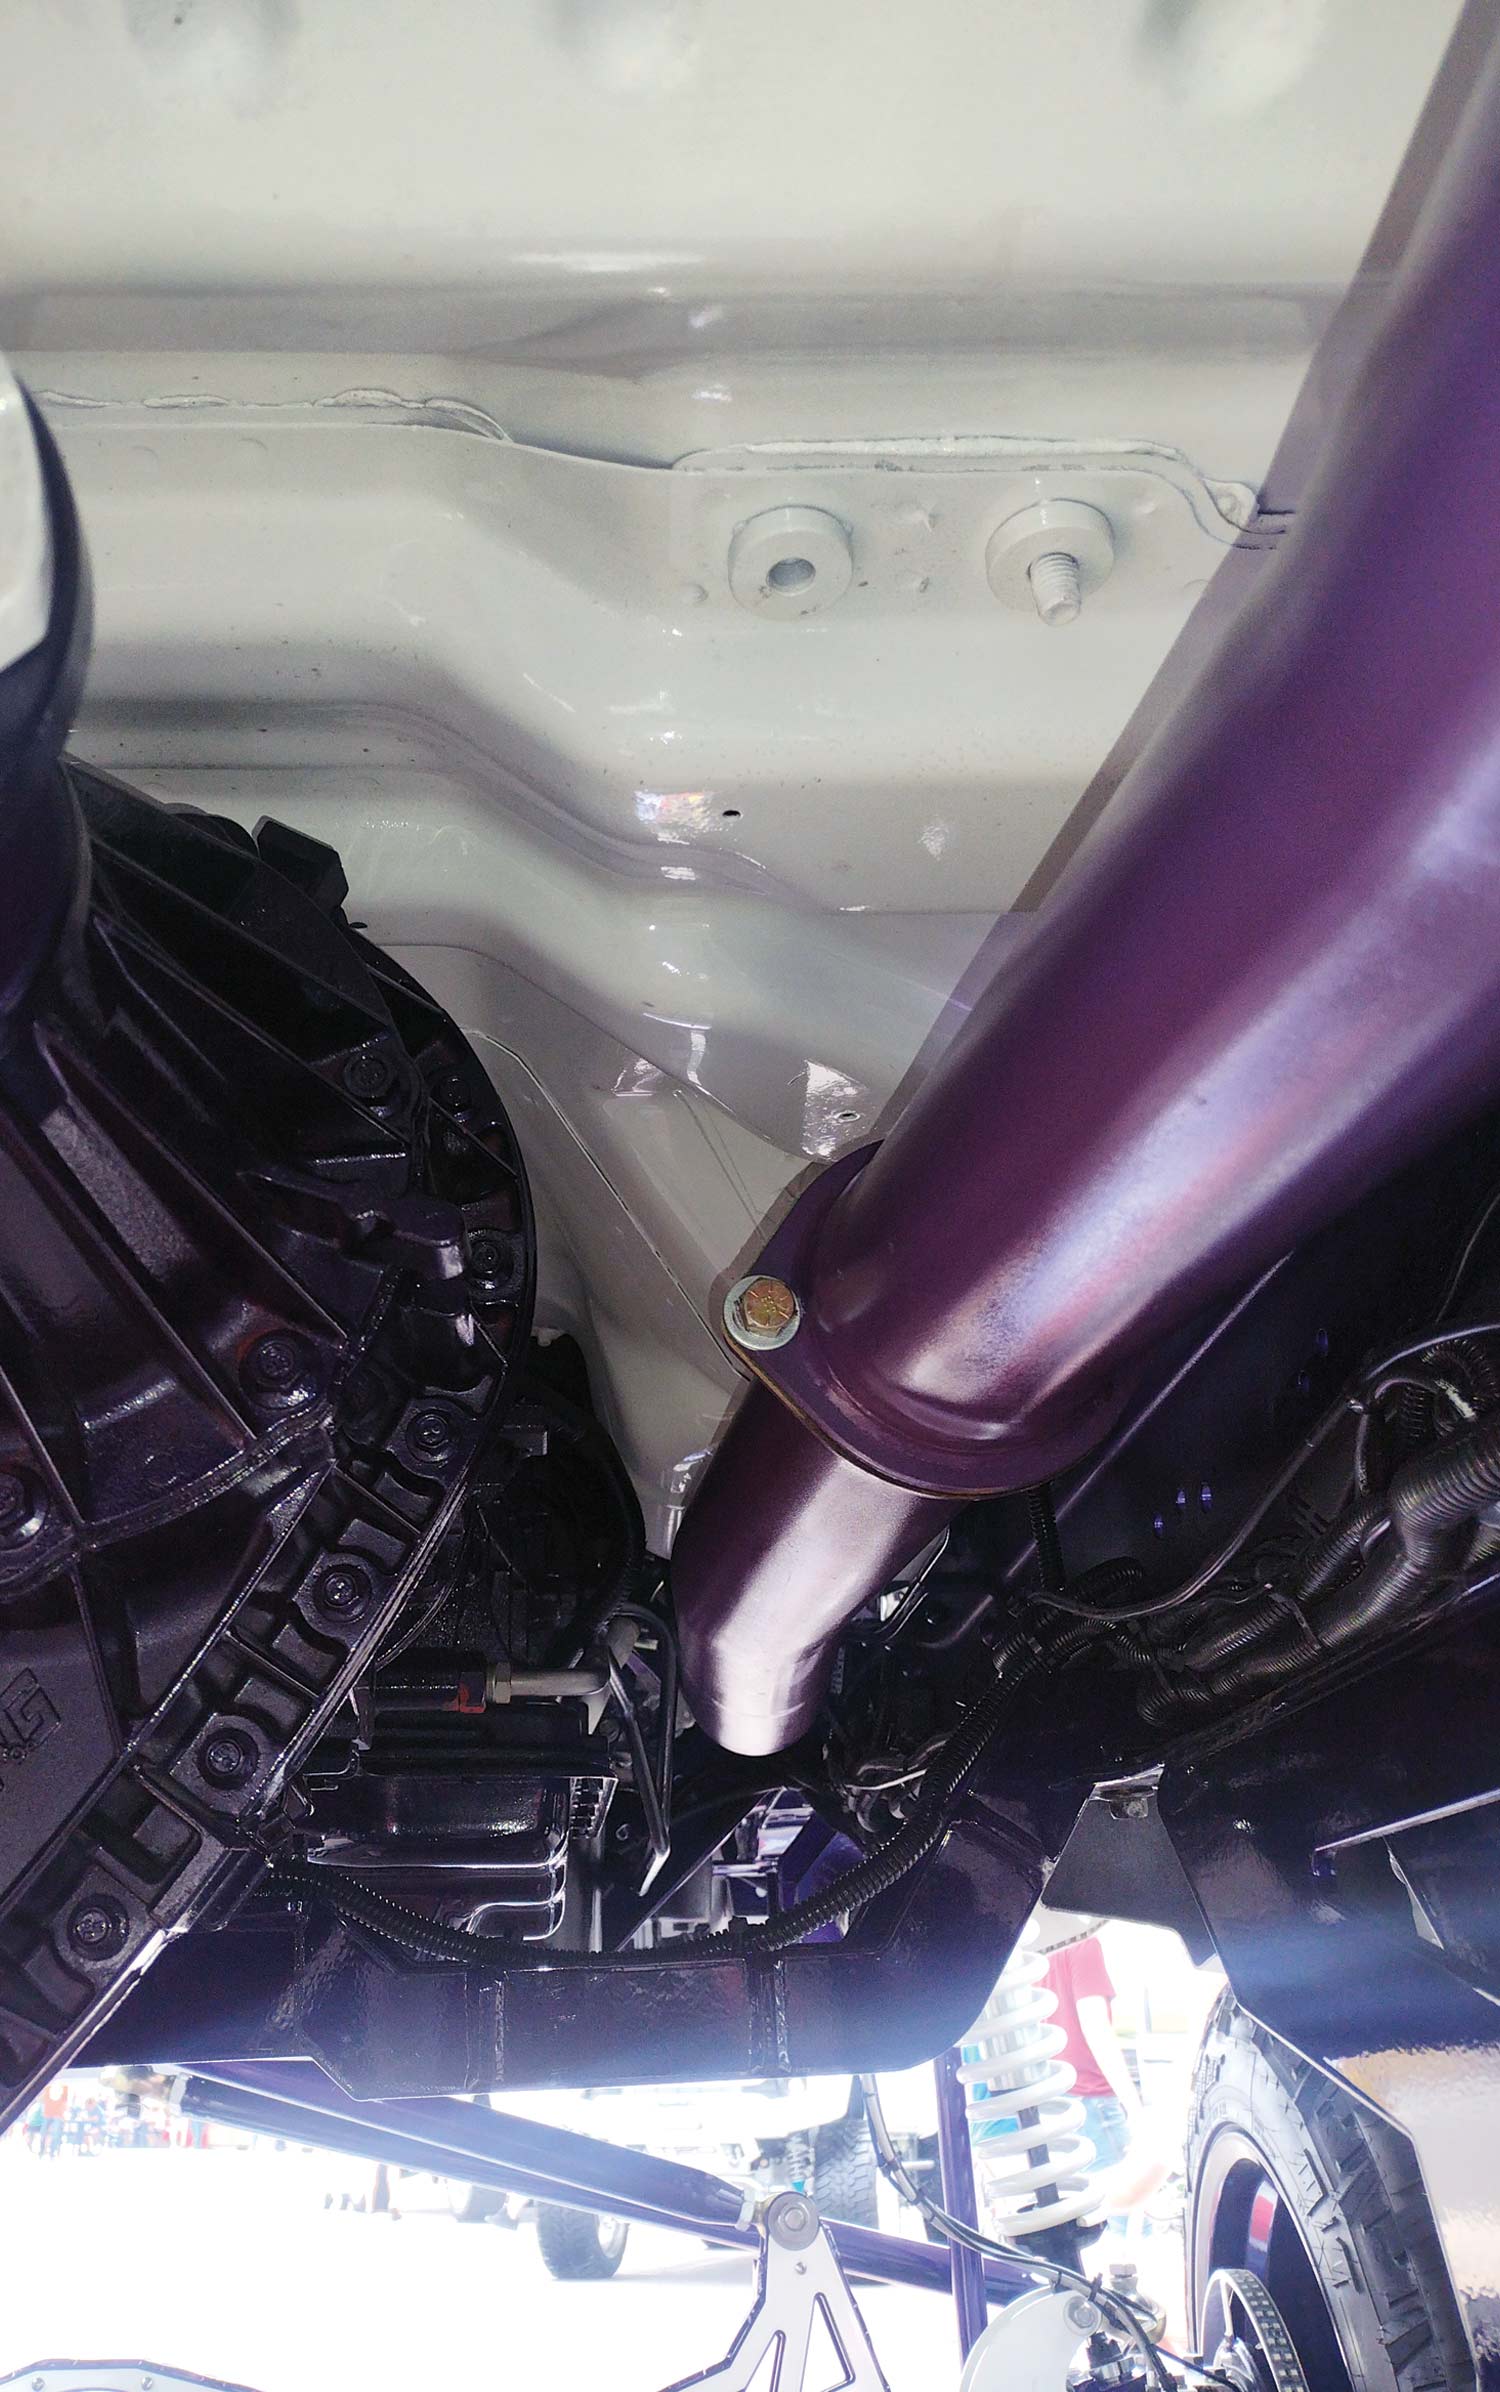 white and purple pipe under the car